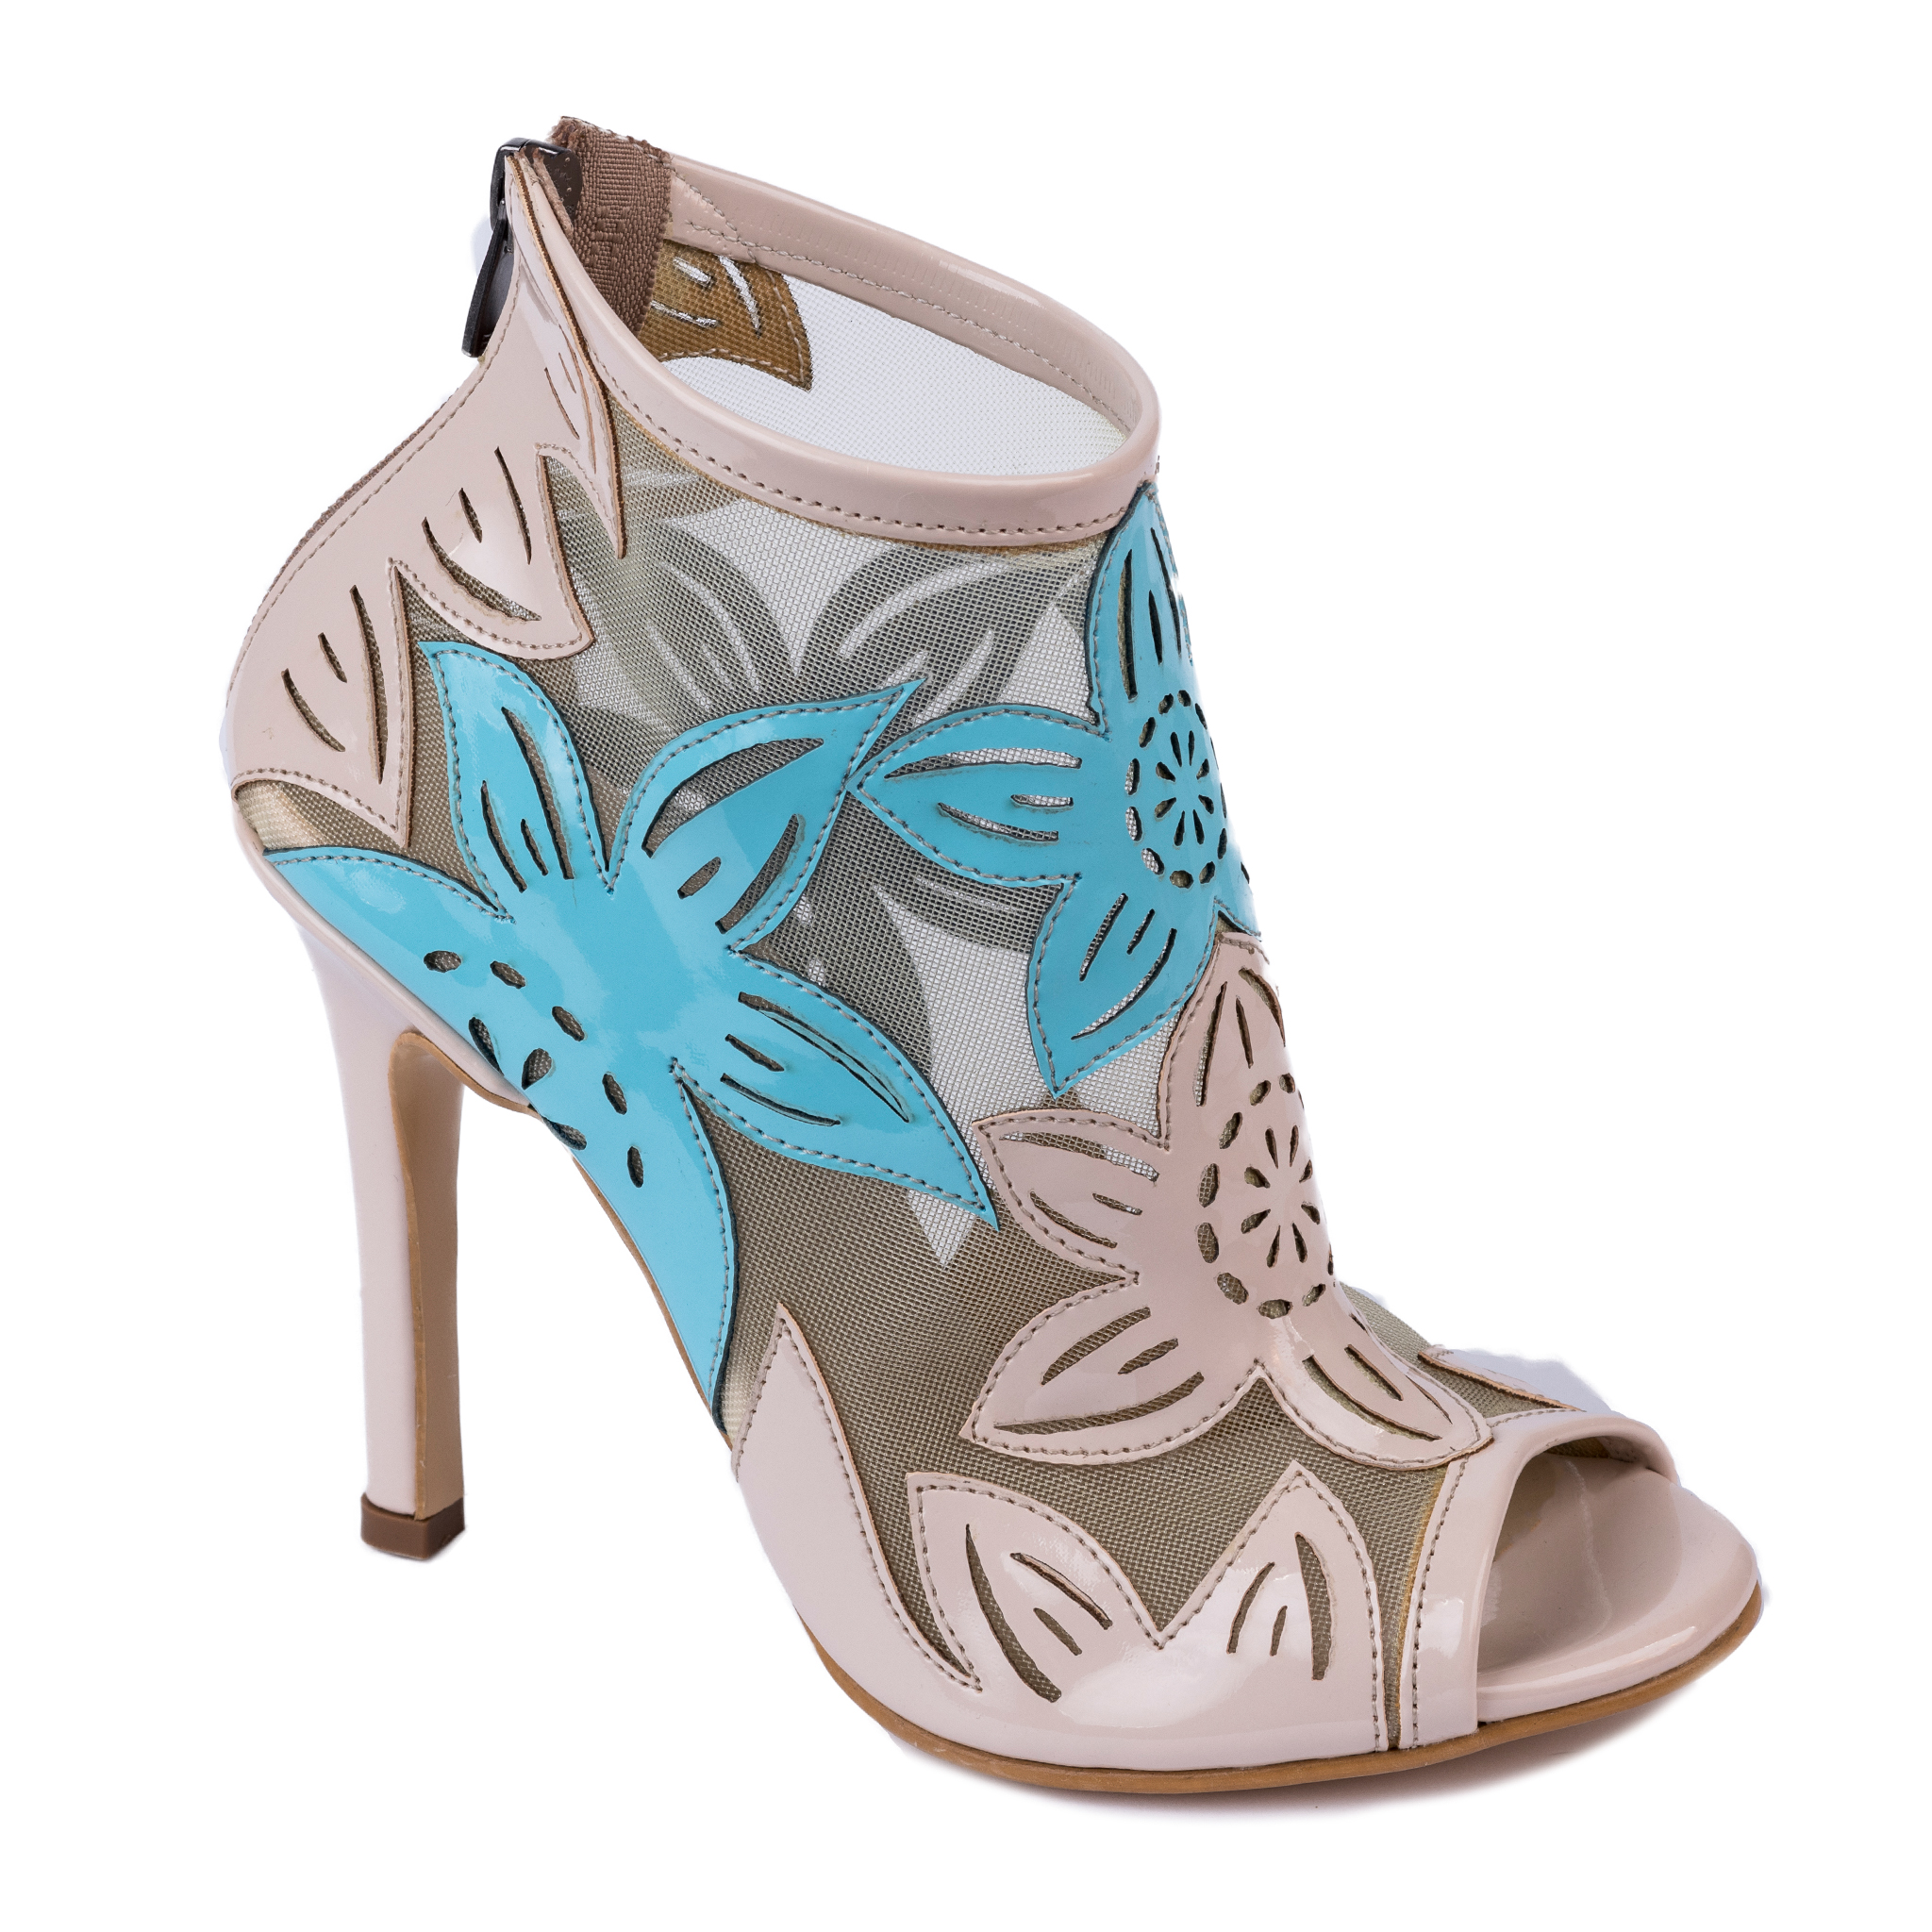 FLOWER PRINT SUMMER ANKLE BOOTS WITH THIN HEEL - BEIGE/BLUE